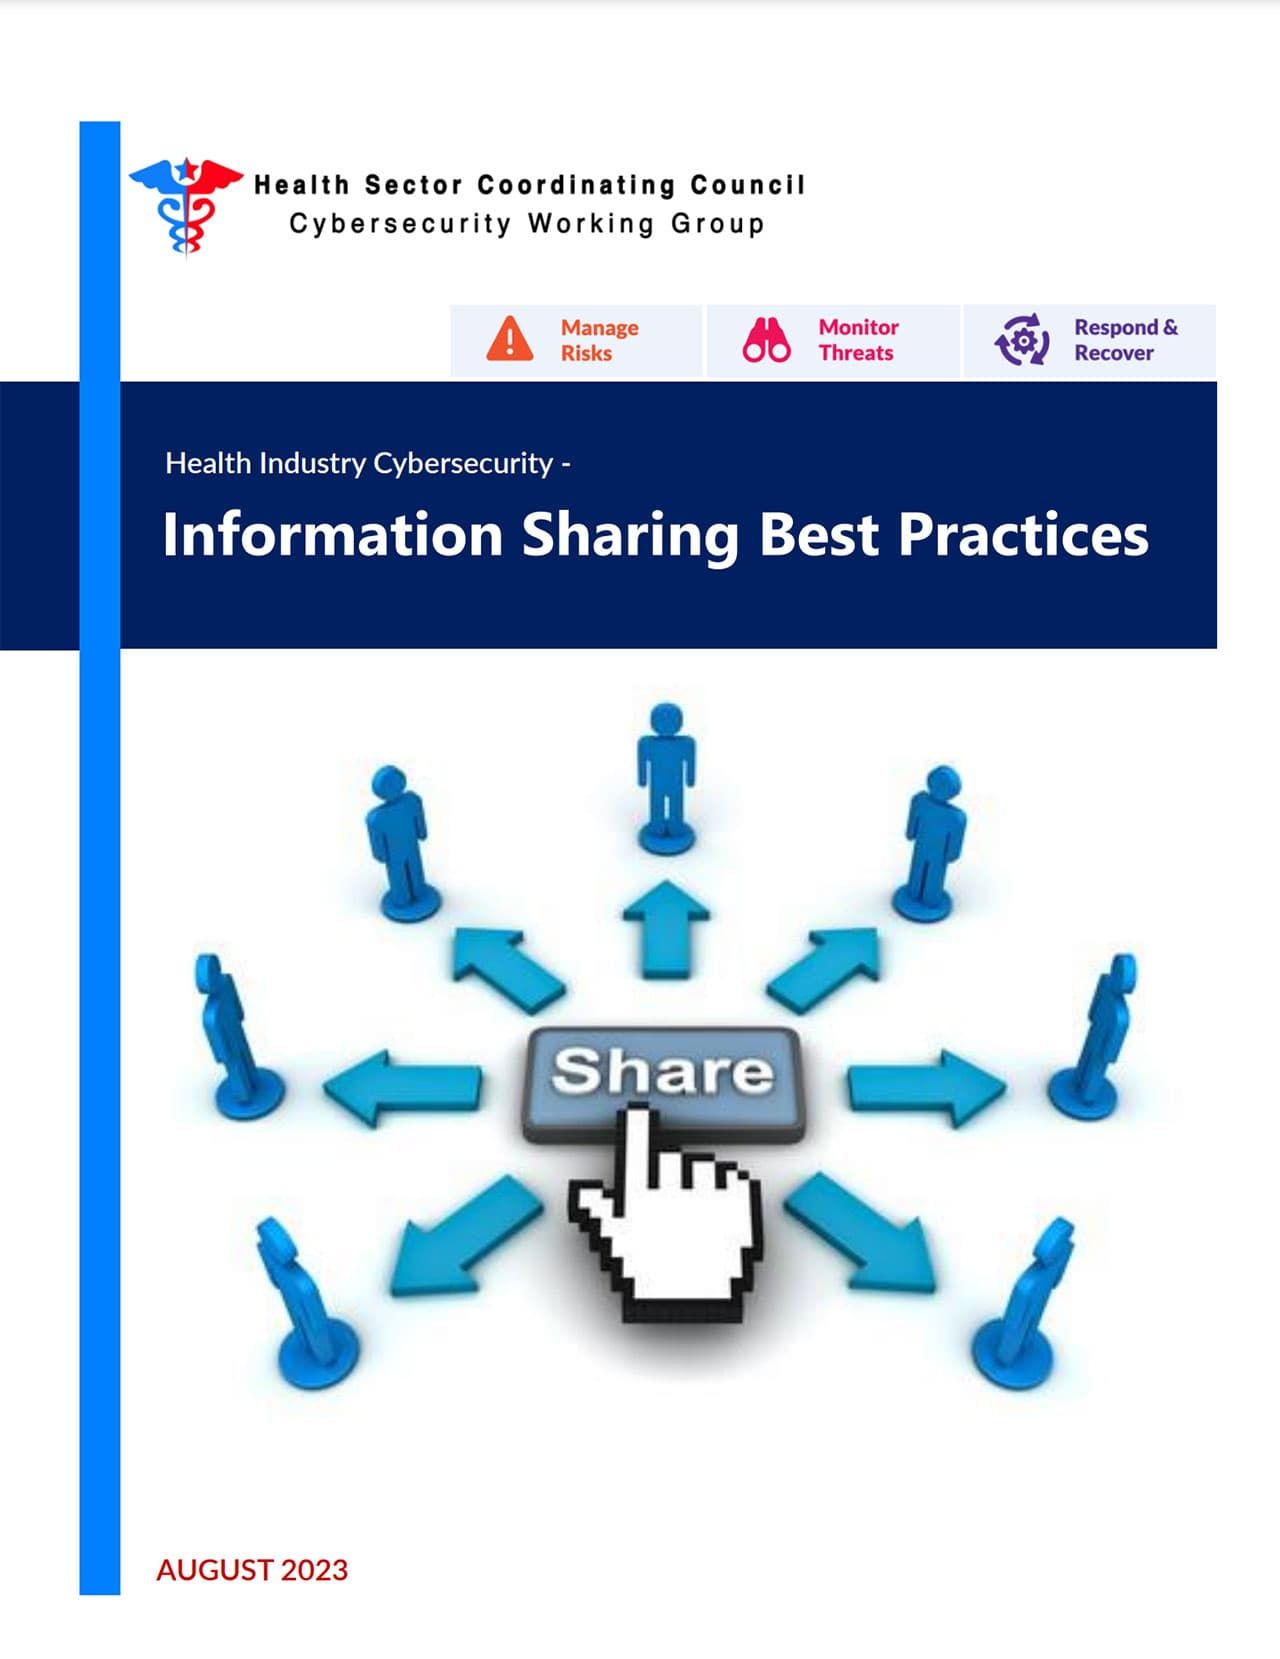 Health Industry Cybersecurity Information Sharing Best Practices (HIC-ISBP)